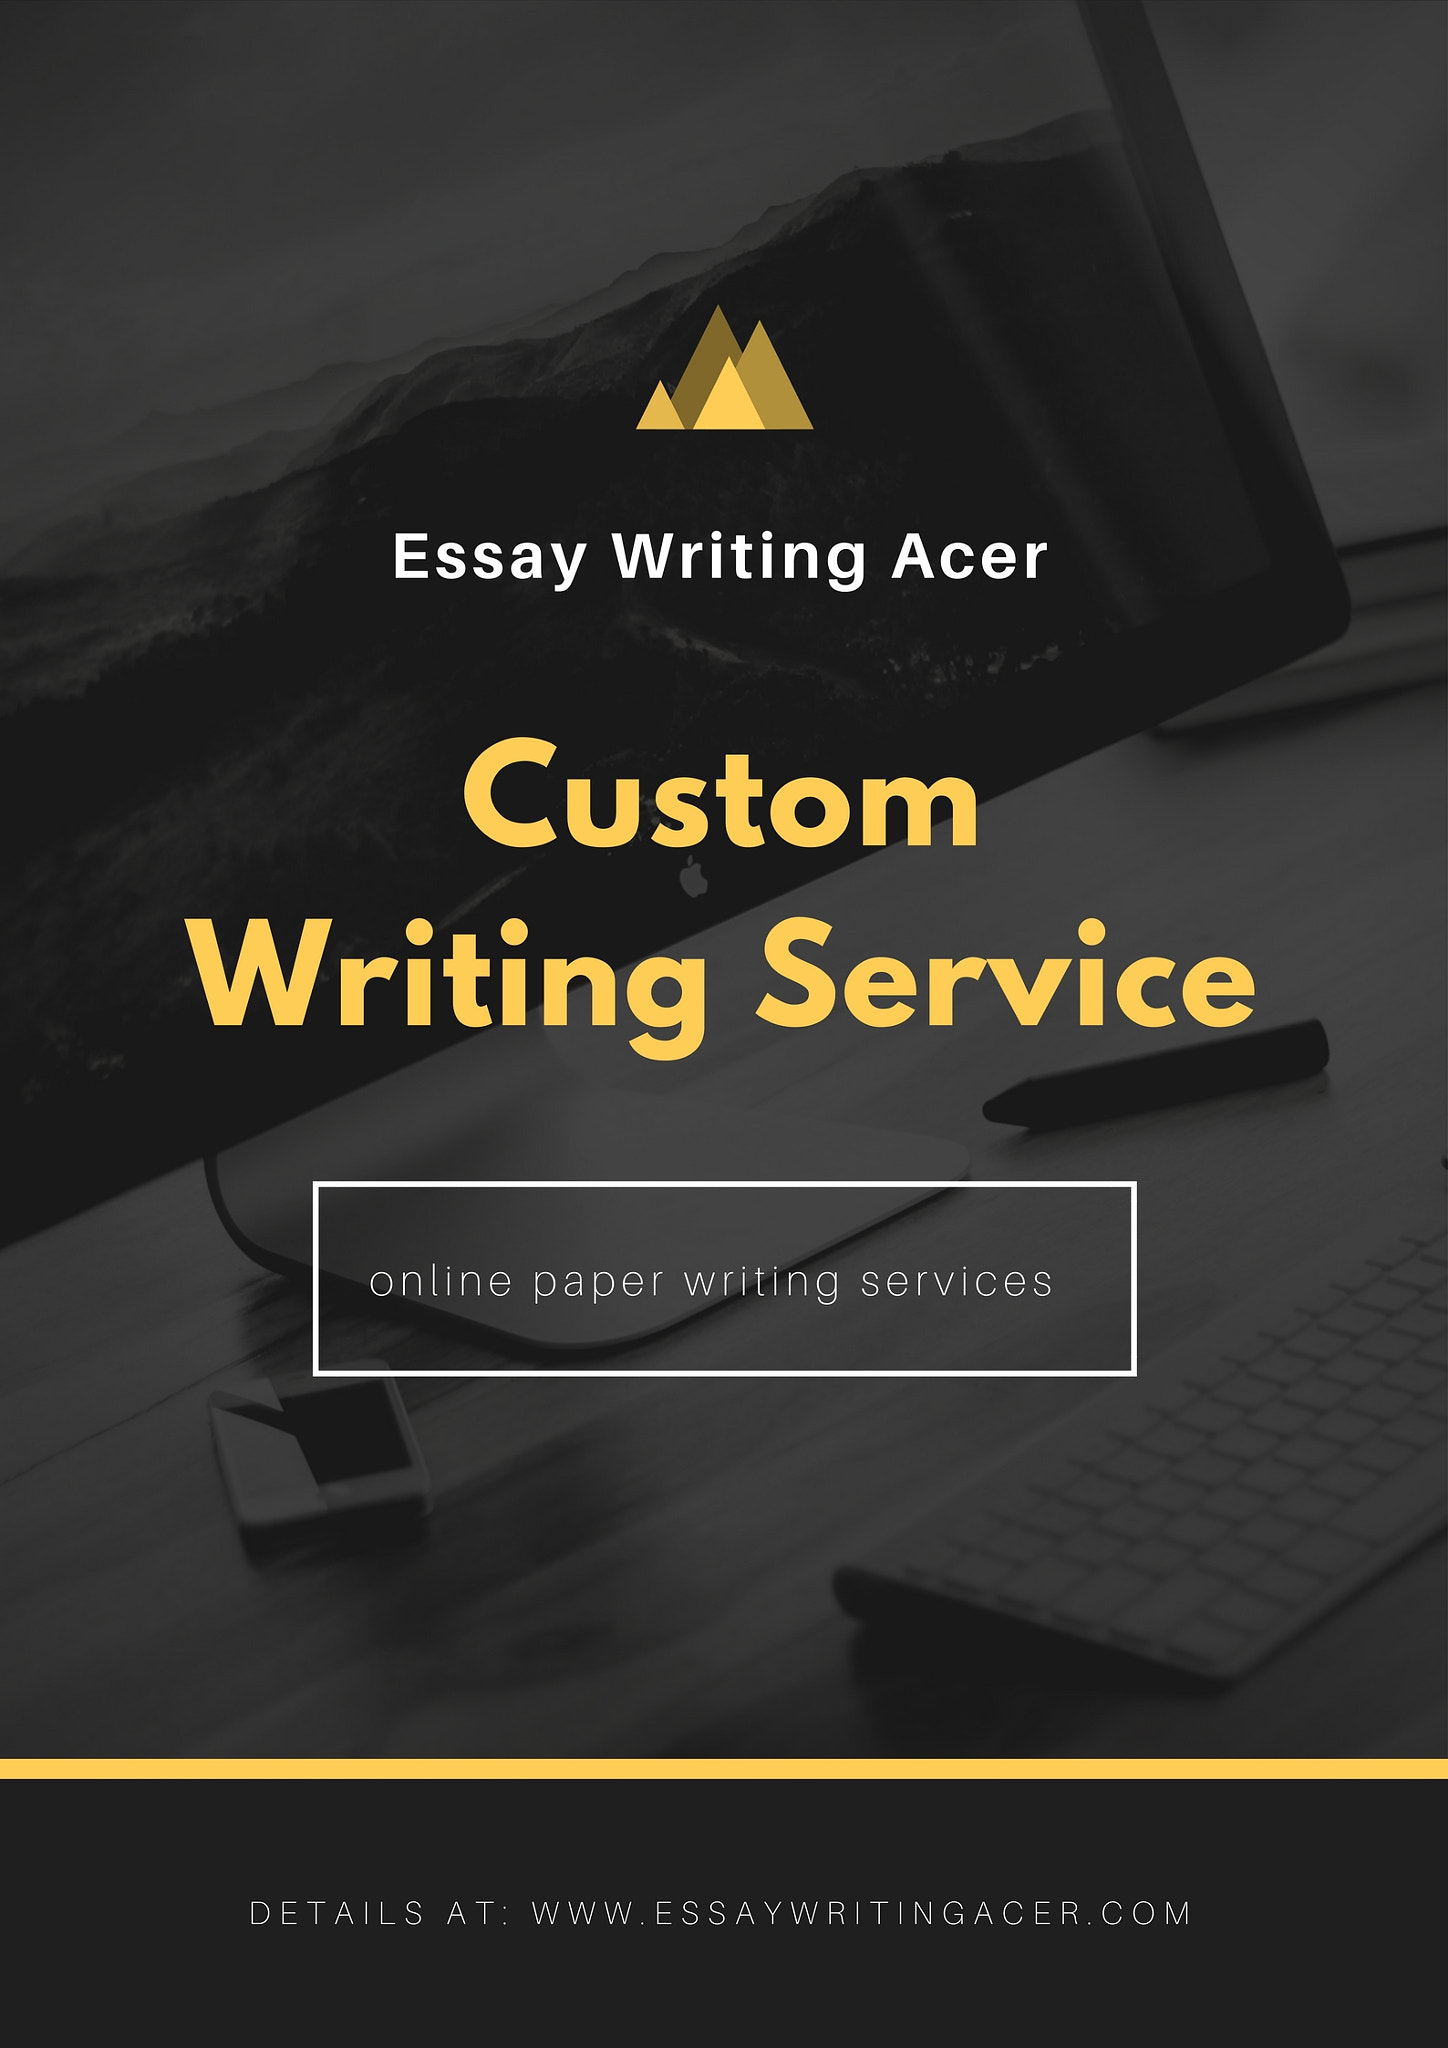 Online paper writing services